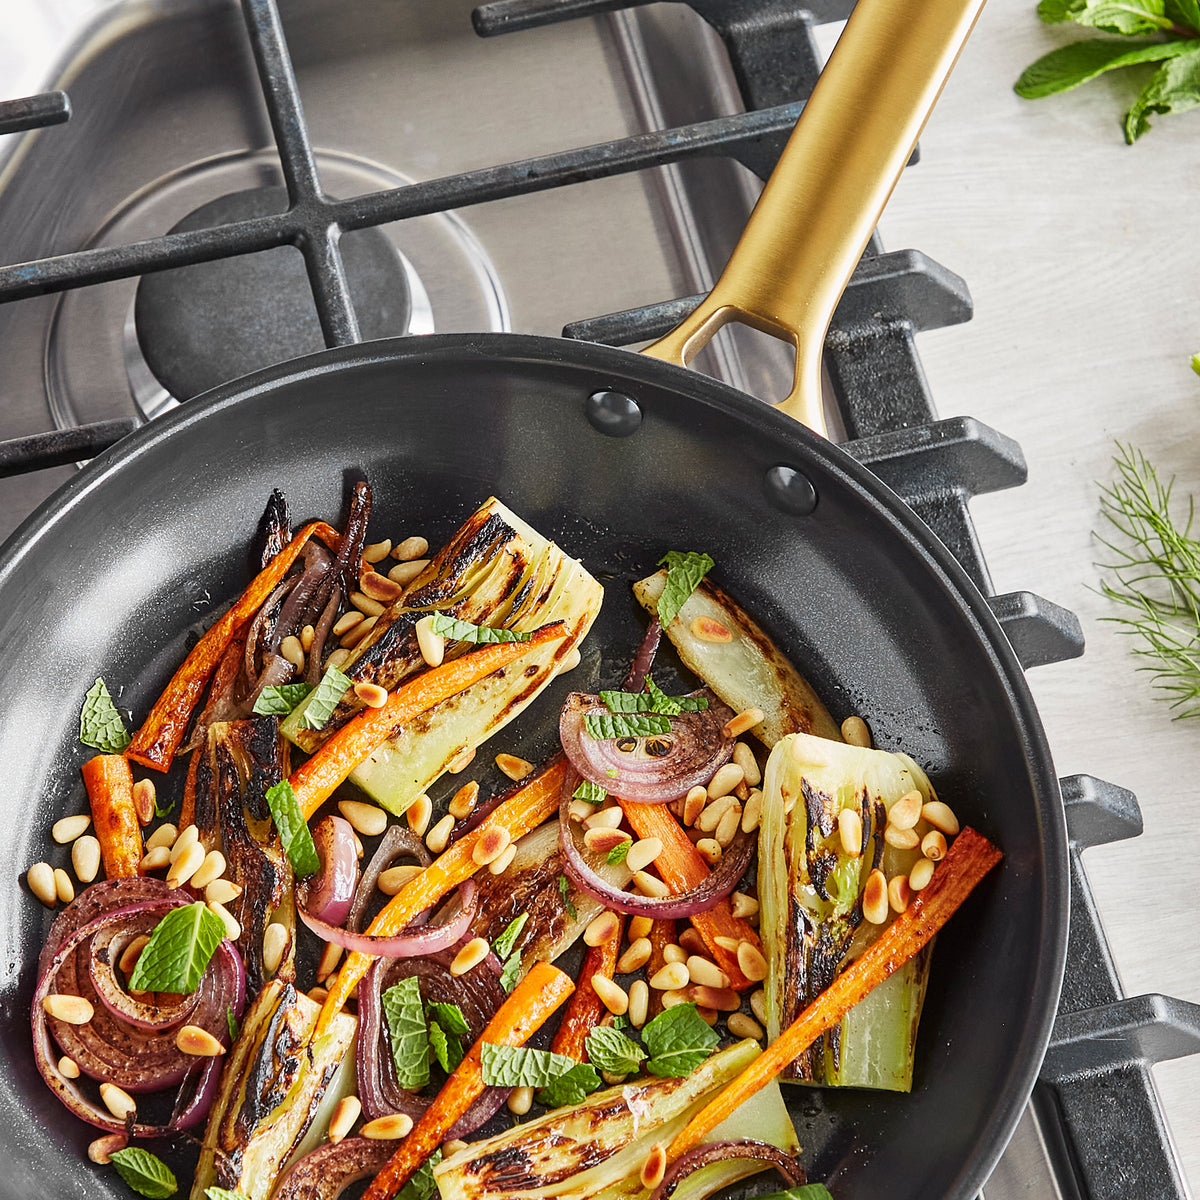 14 Stir-Fry Pan with Helper Handle & Glass Cover 